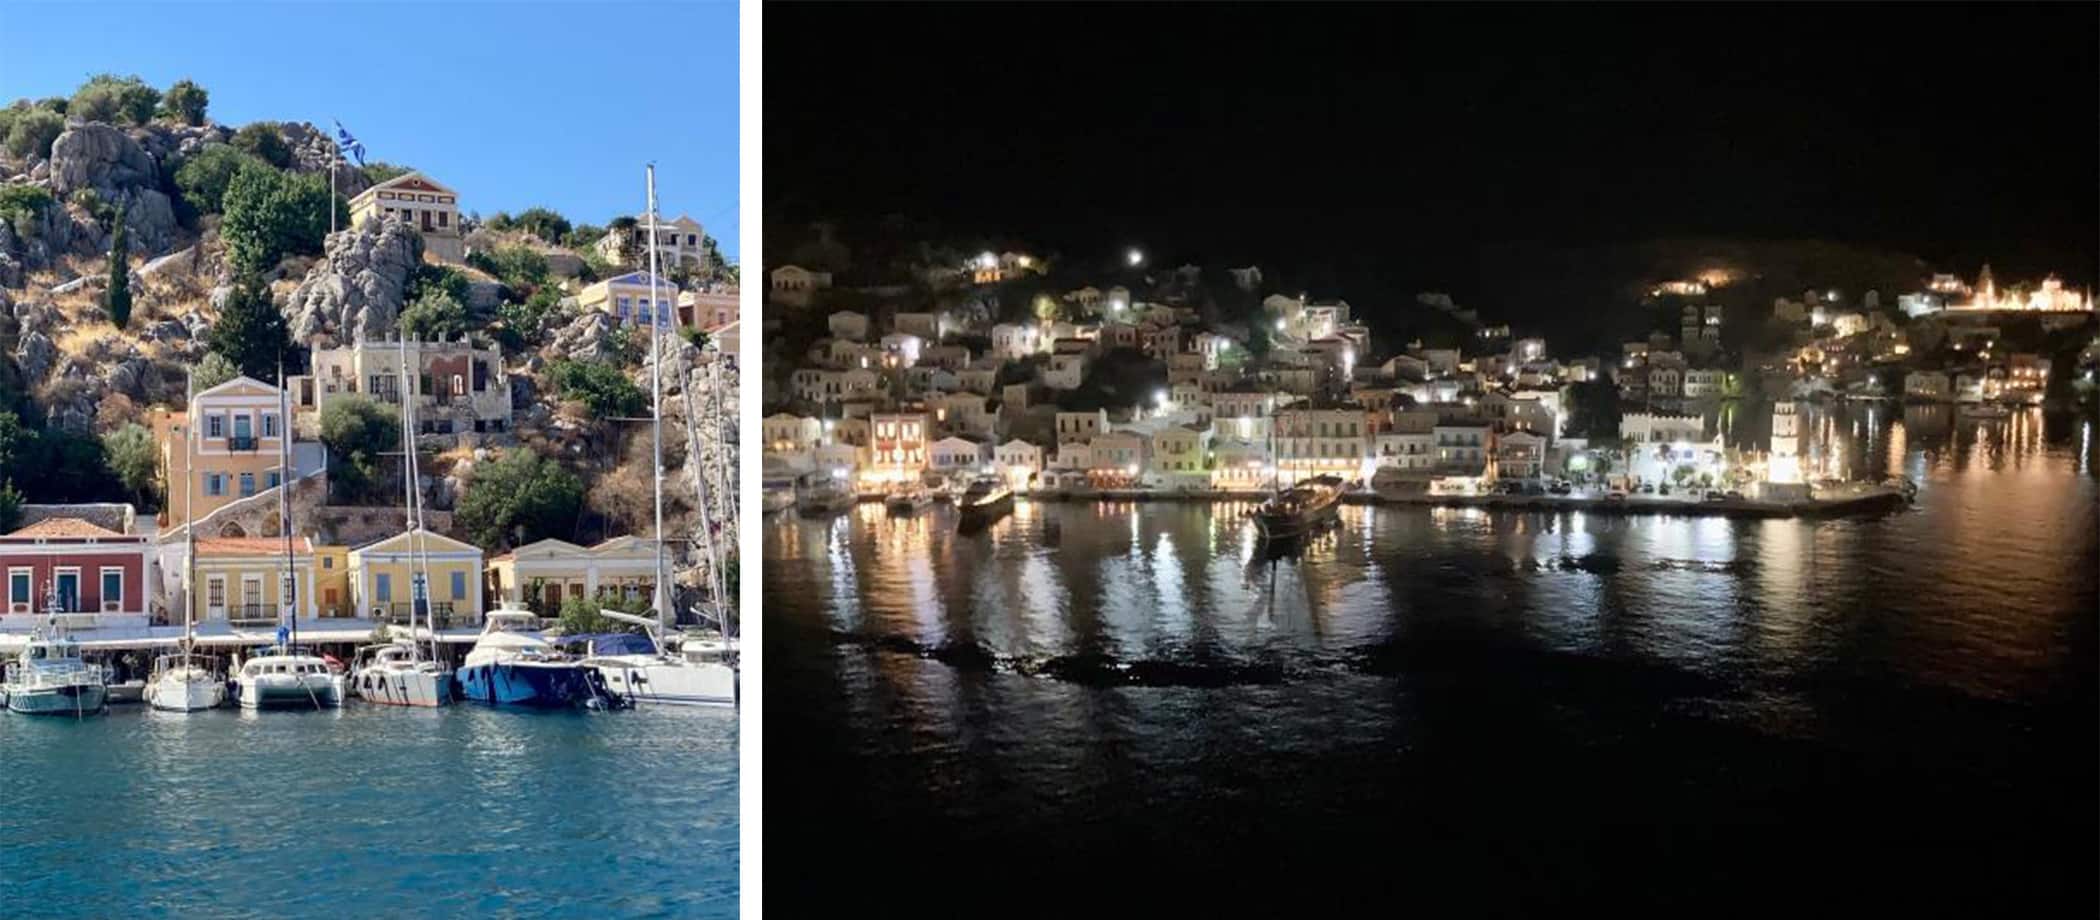 Dodecanese Sailing Itinerary - sailboats docked in the harbor during the day and at night